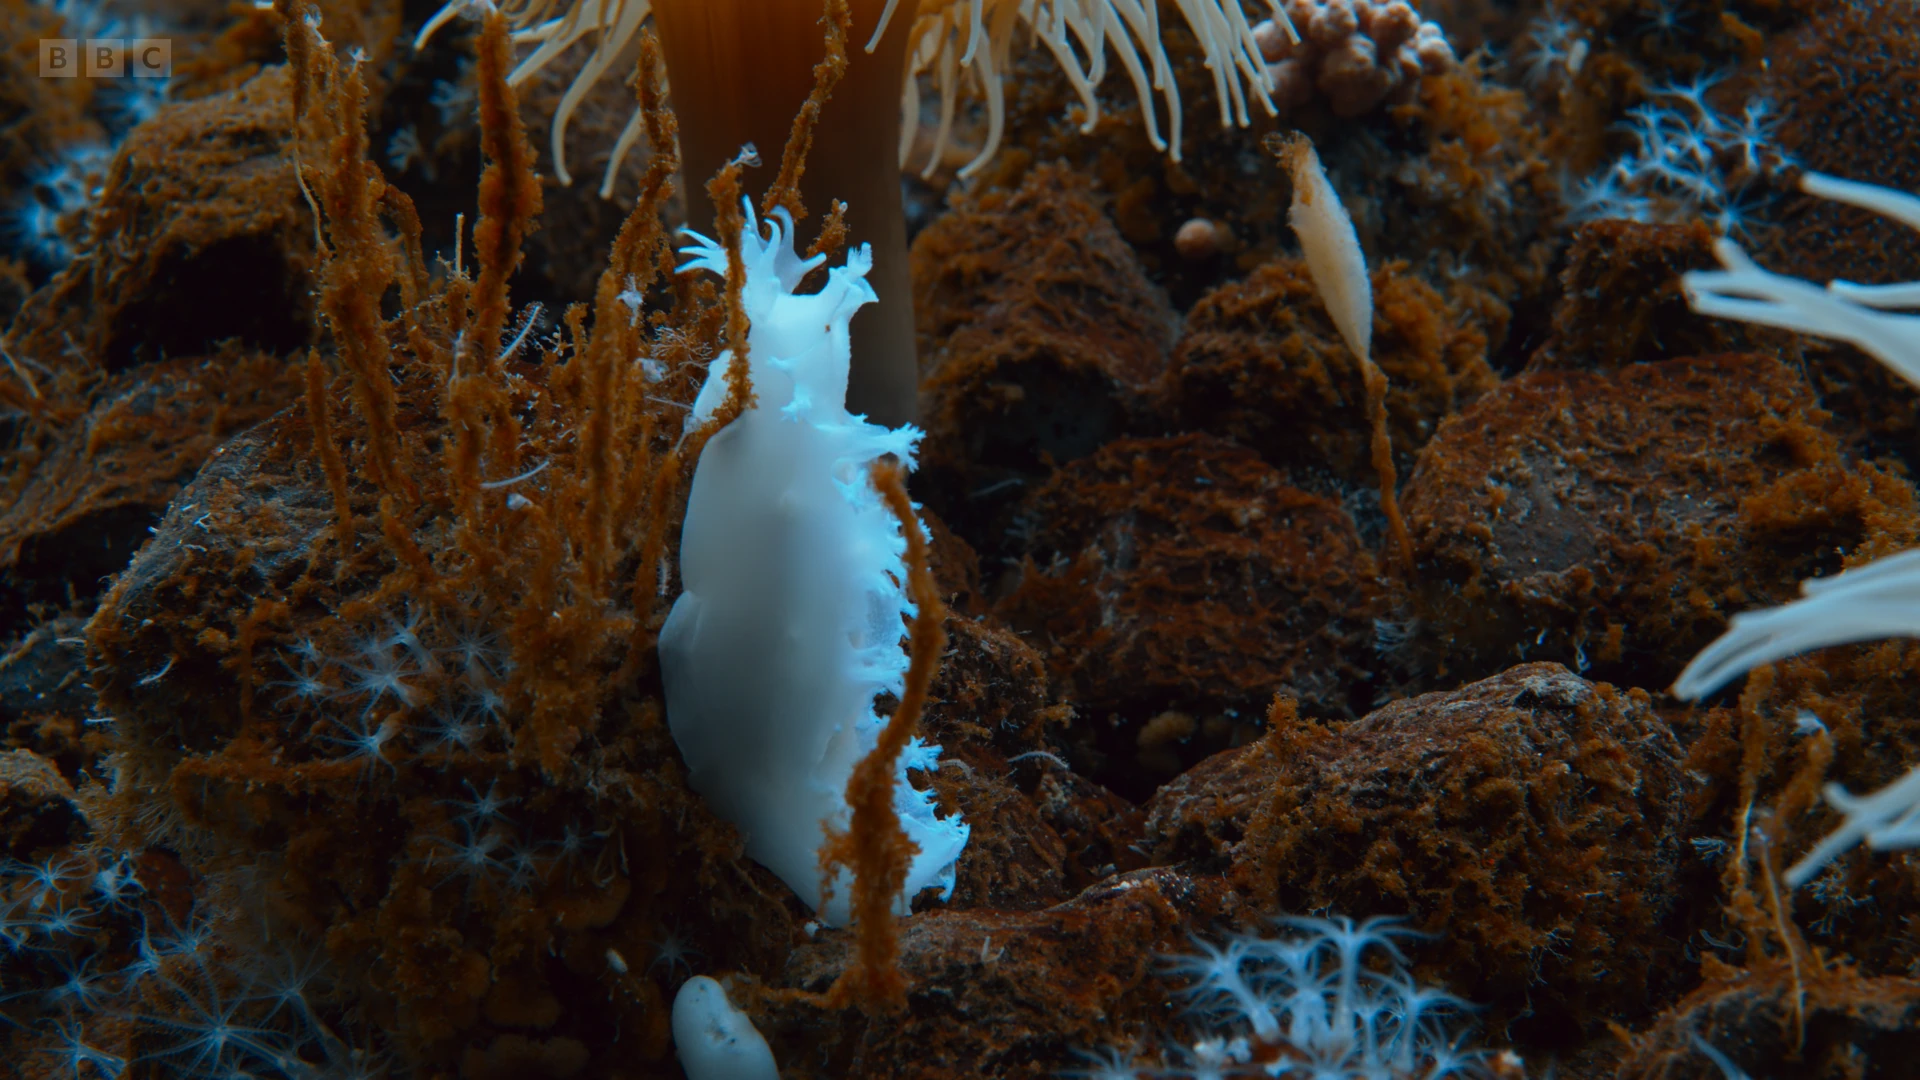 Nudibranch (Tritonia challengeriana) as shown in Seven Worlds, One Planet - Antarctica